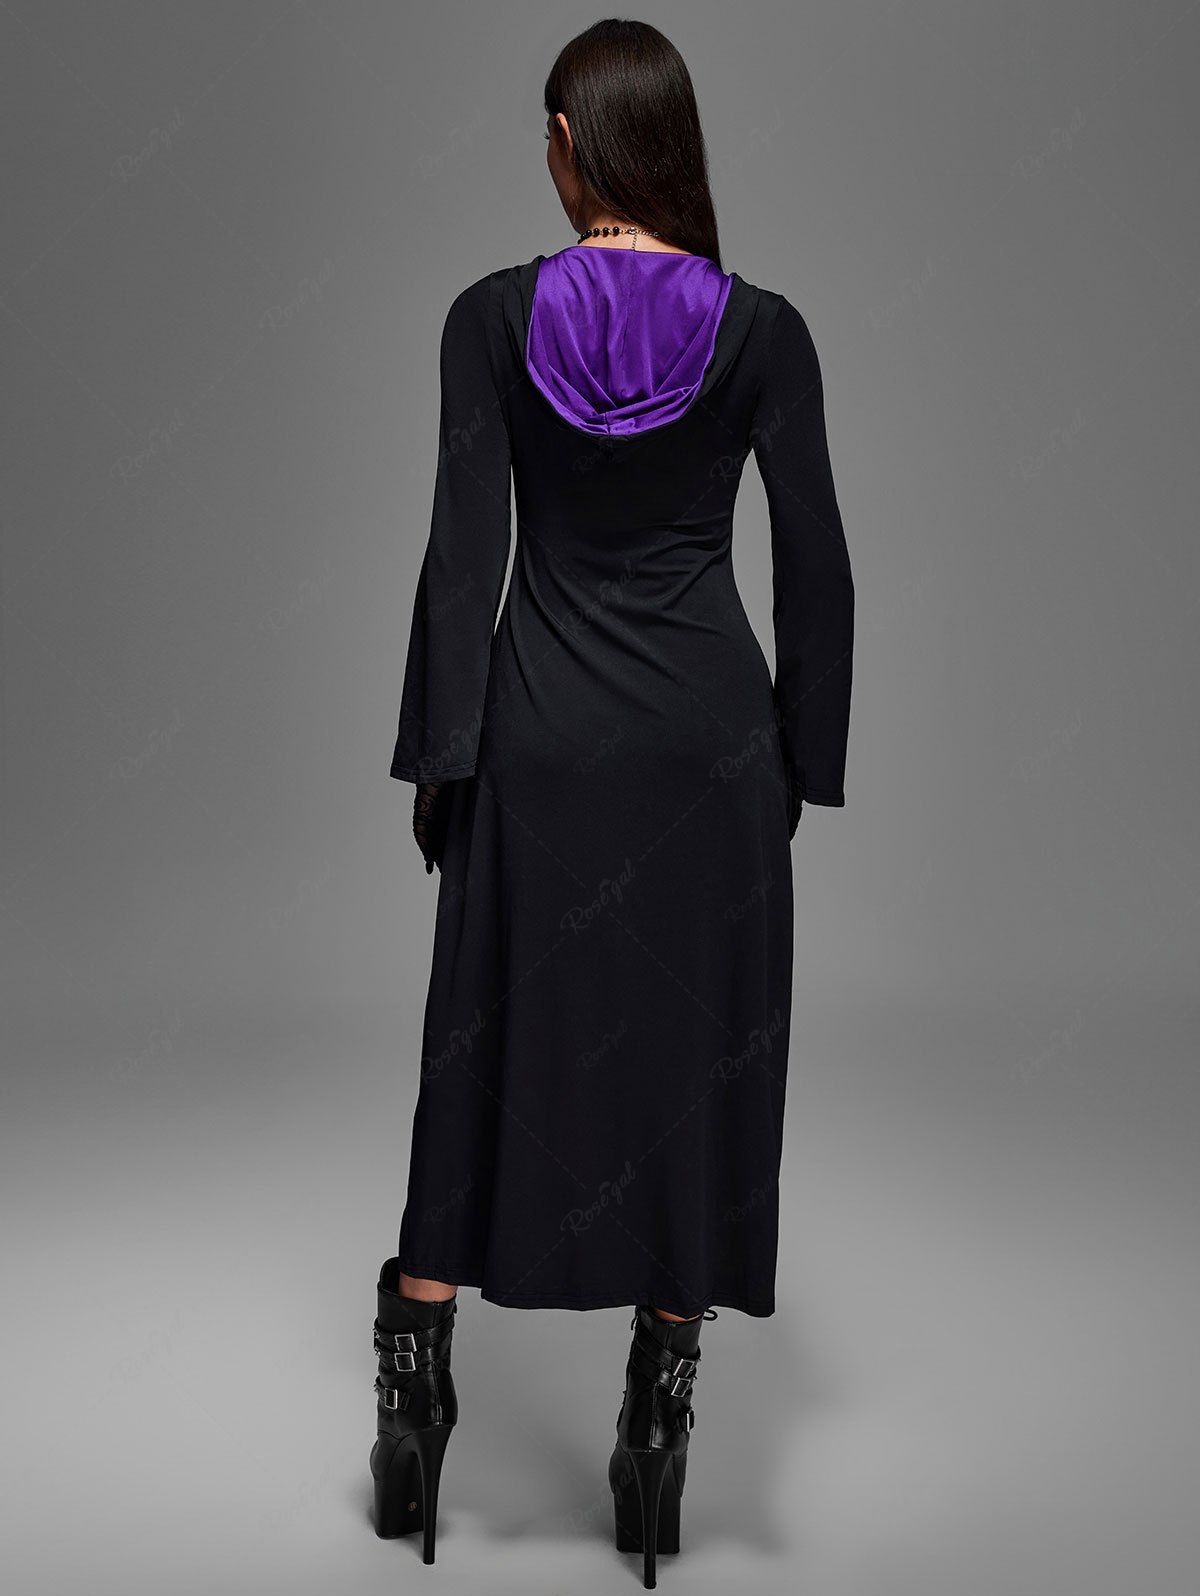 Gothic Medieval Renaissance Lace Up Two Tone Plus Size Hooded Dress